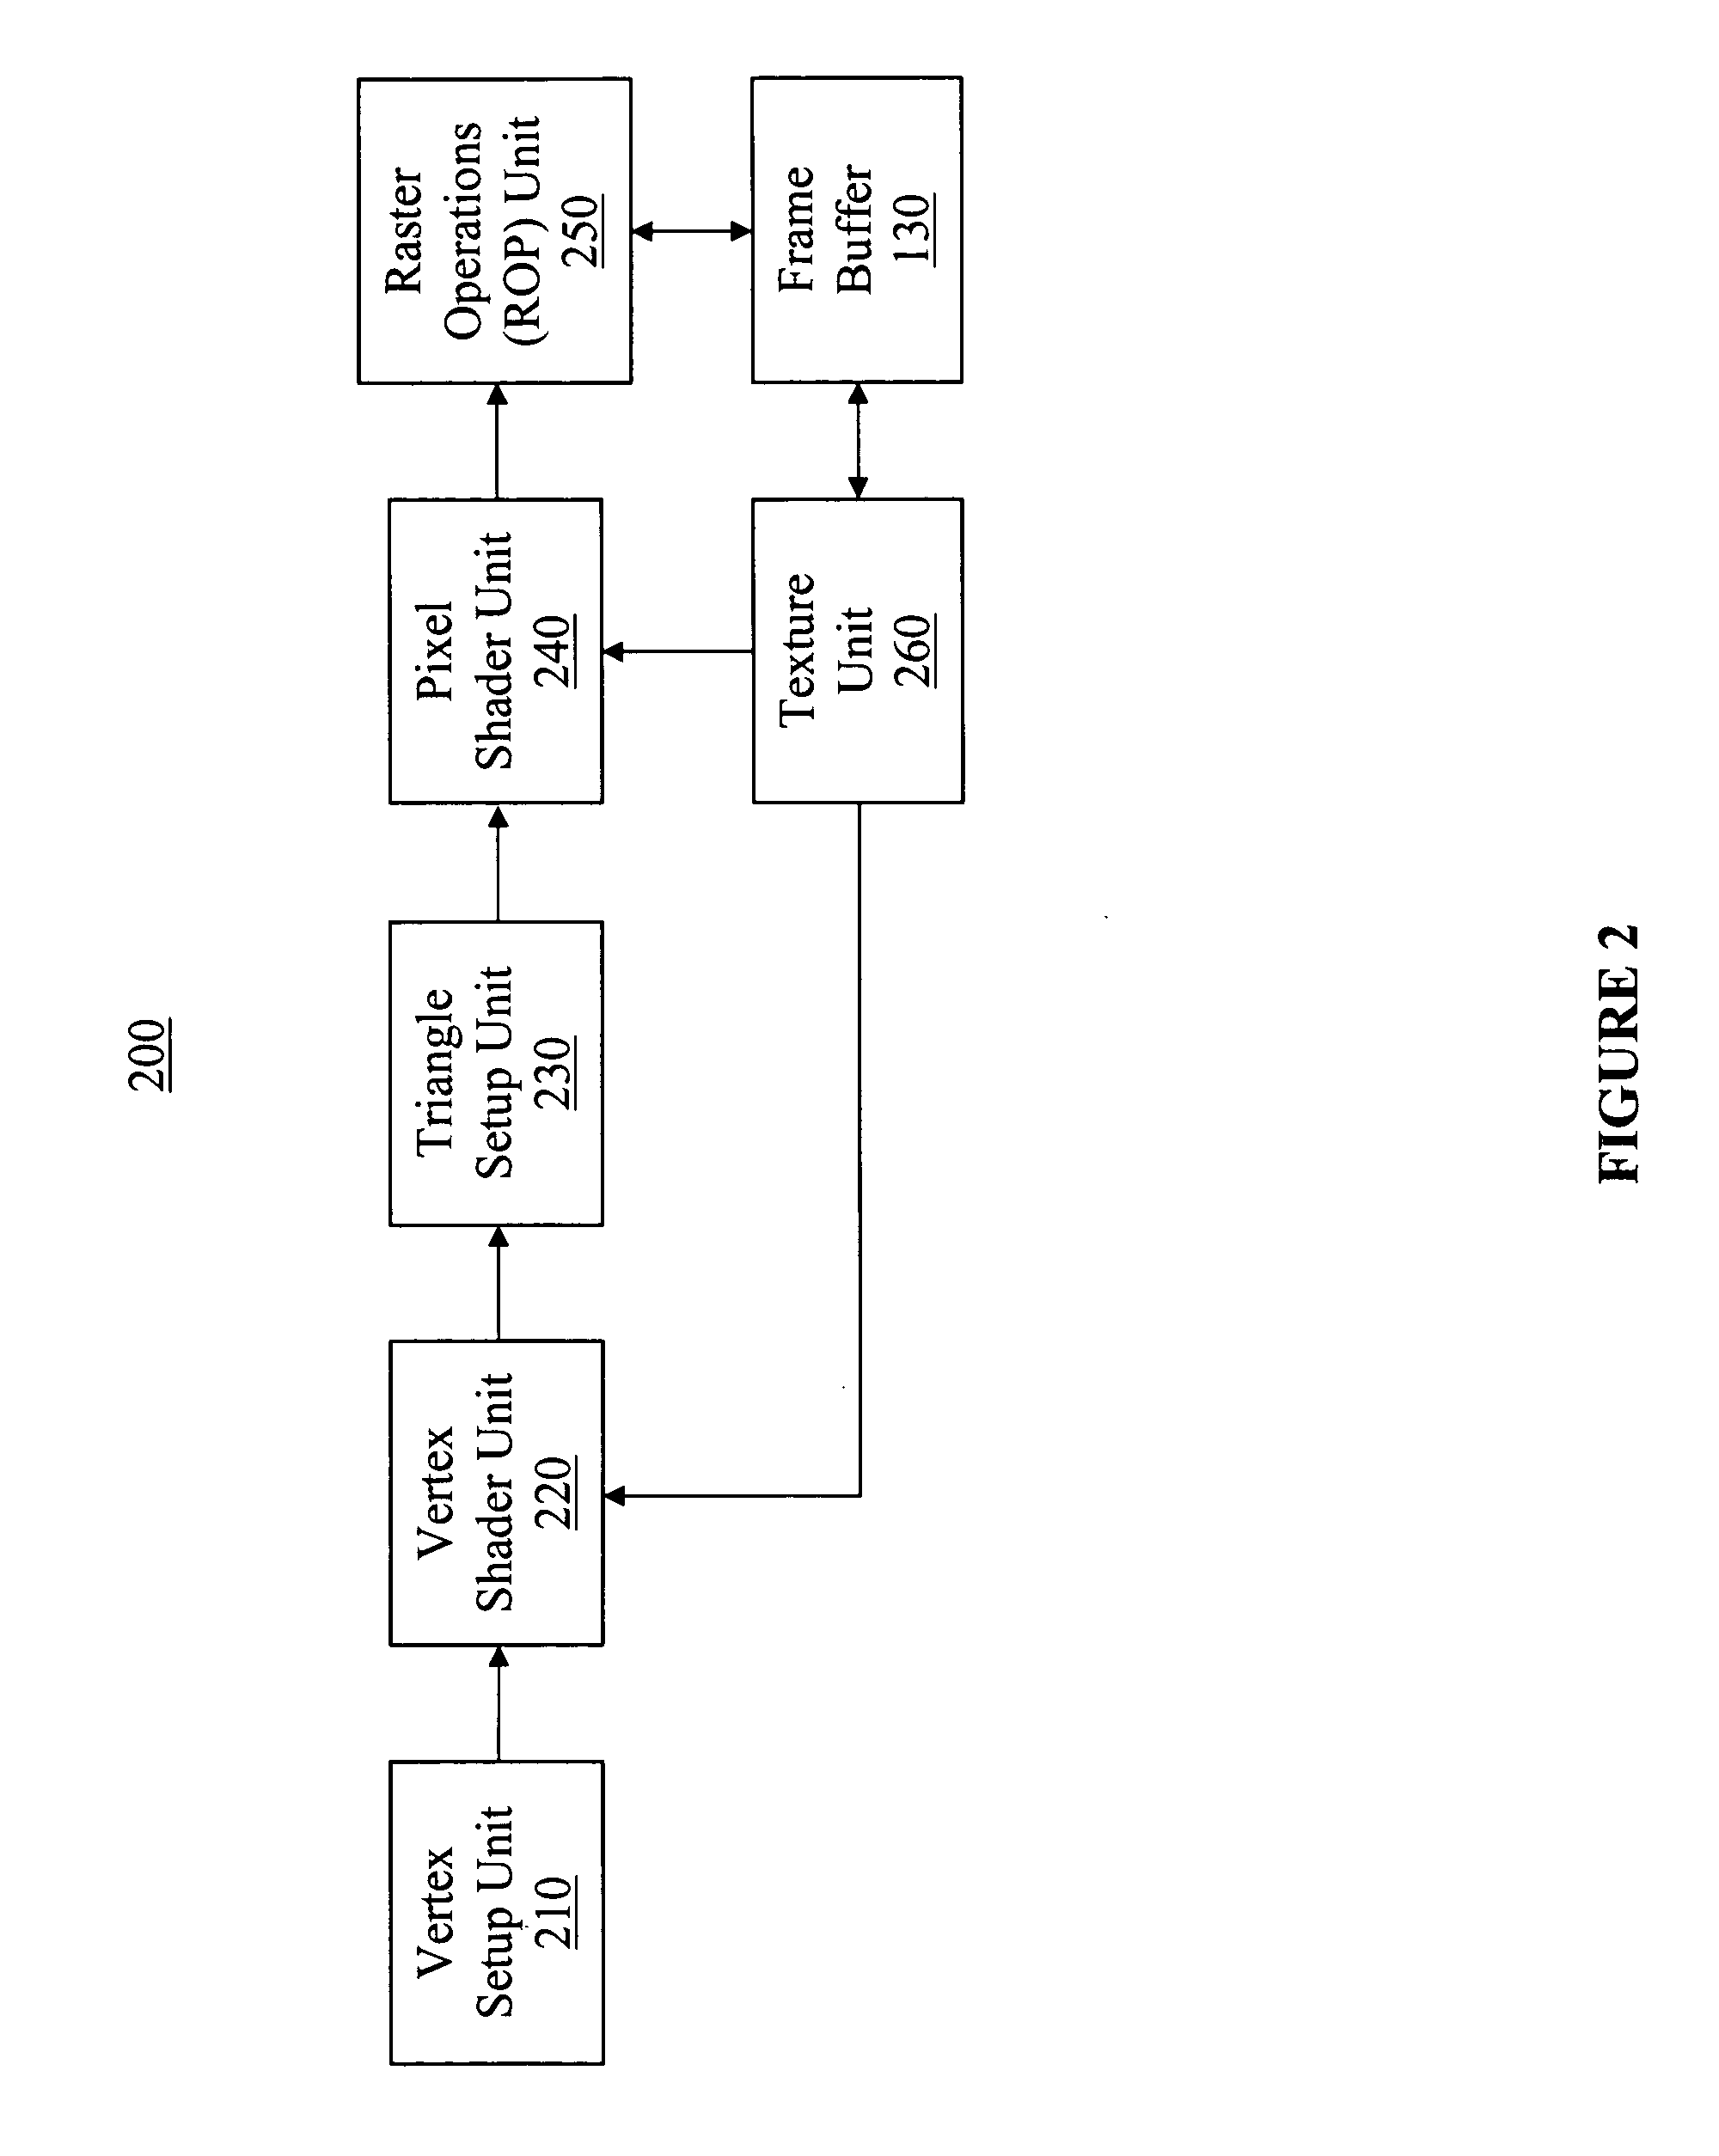 Method and user interface for enhanced graphical operation organization